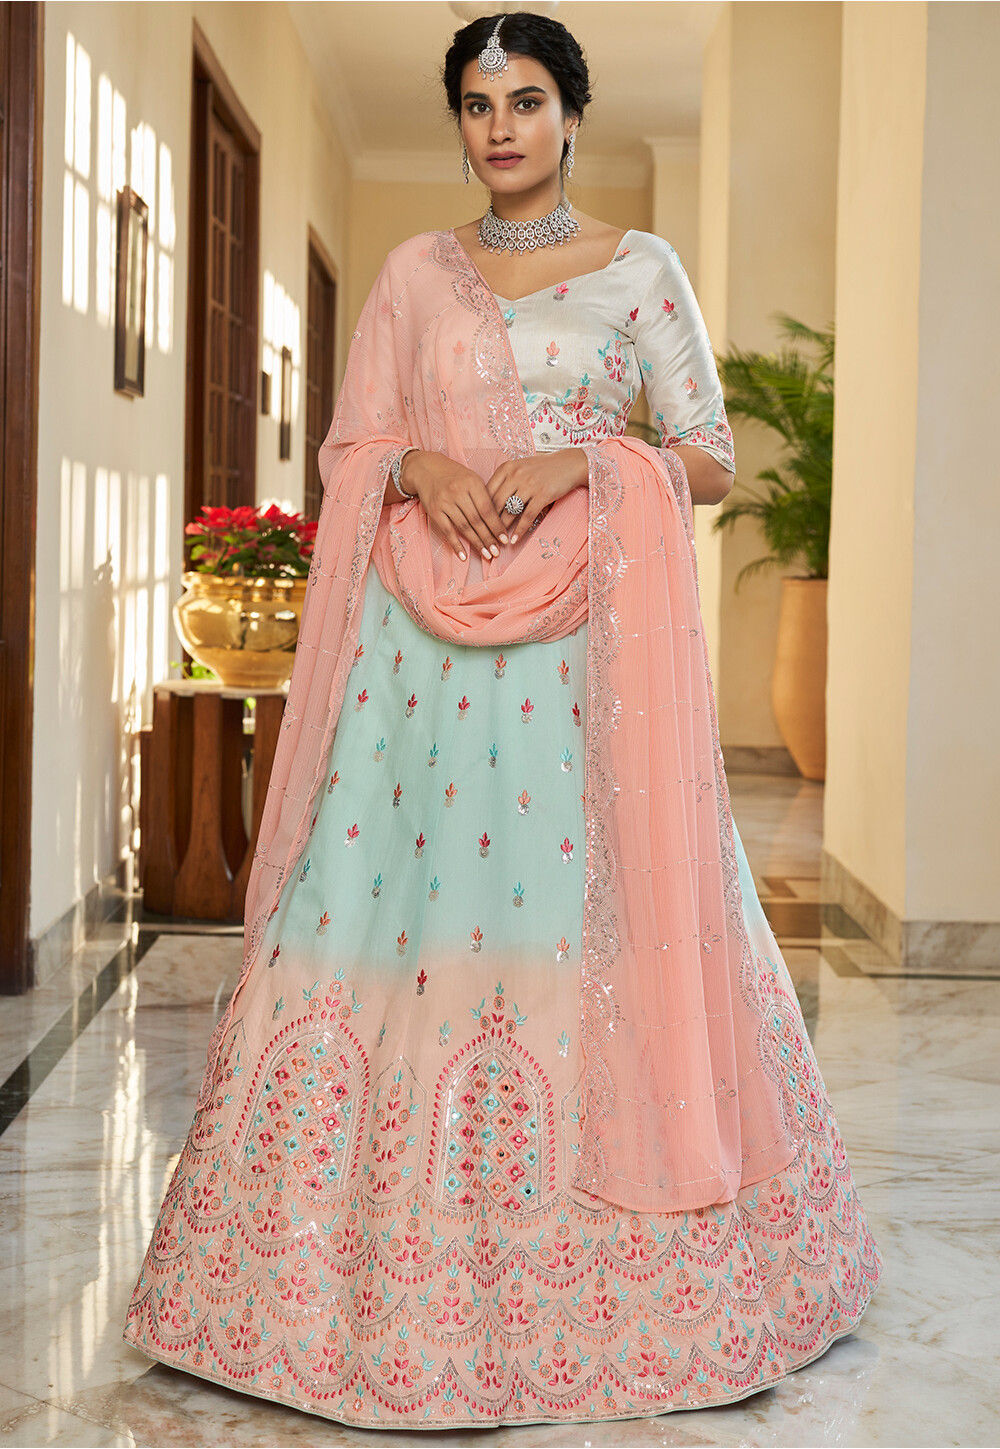 Share more than 144 peach and red combination lehenga